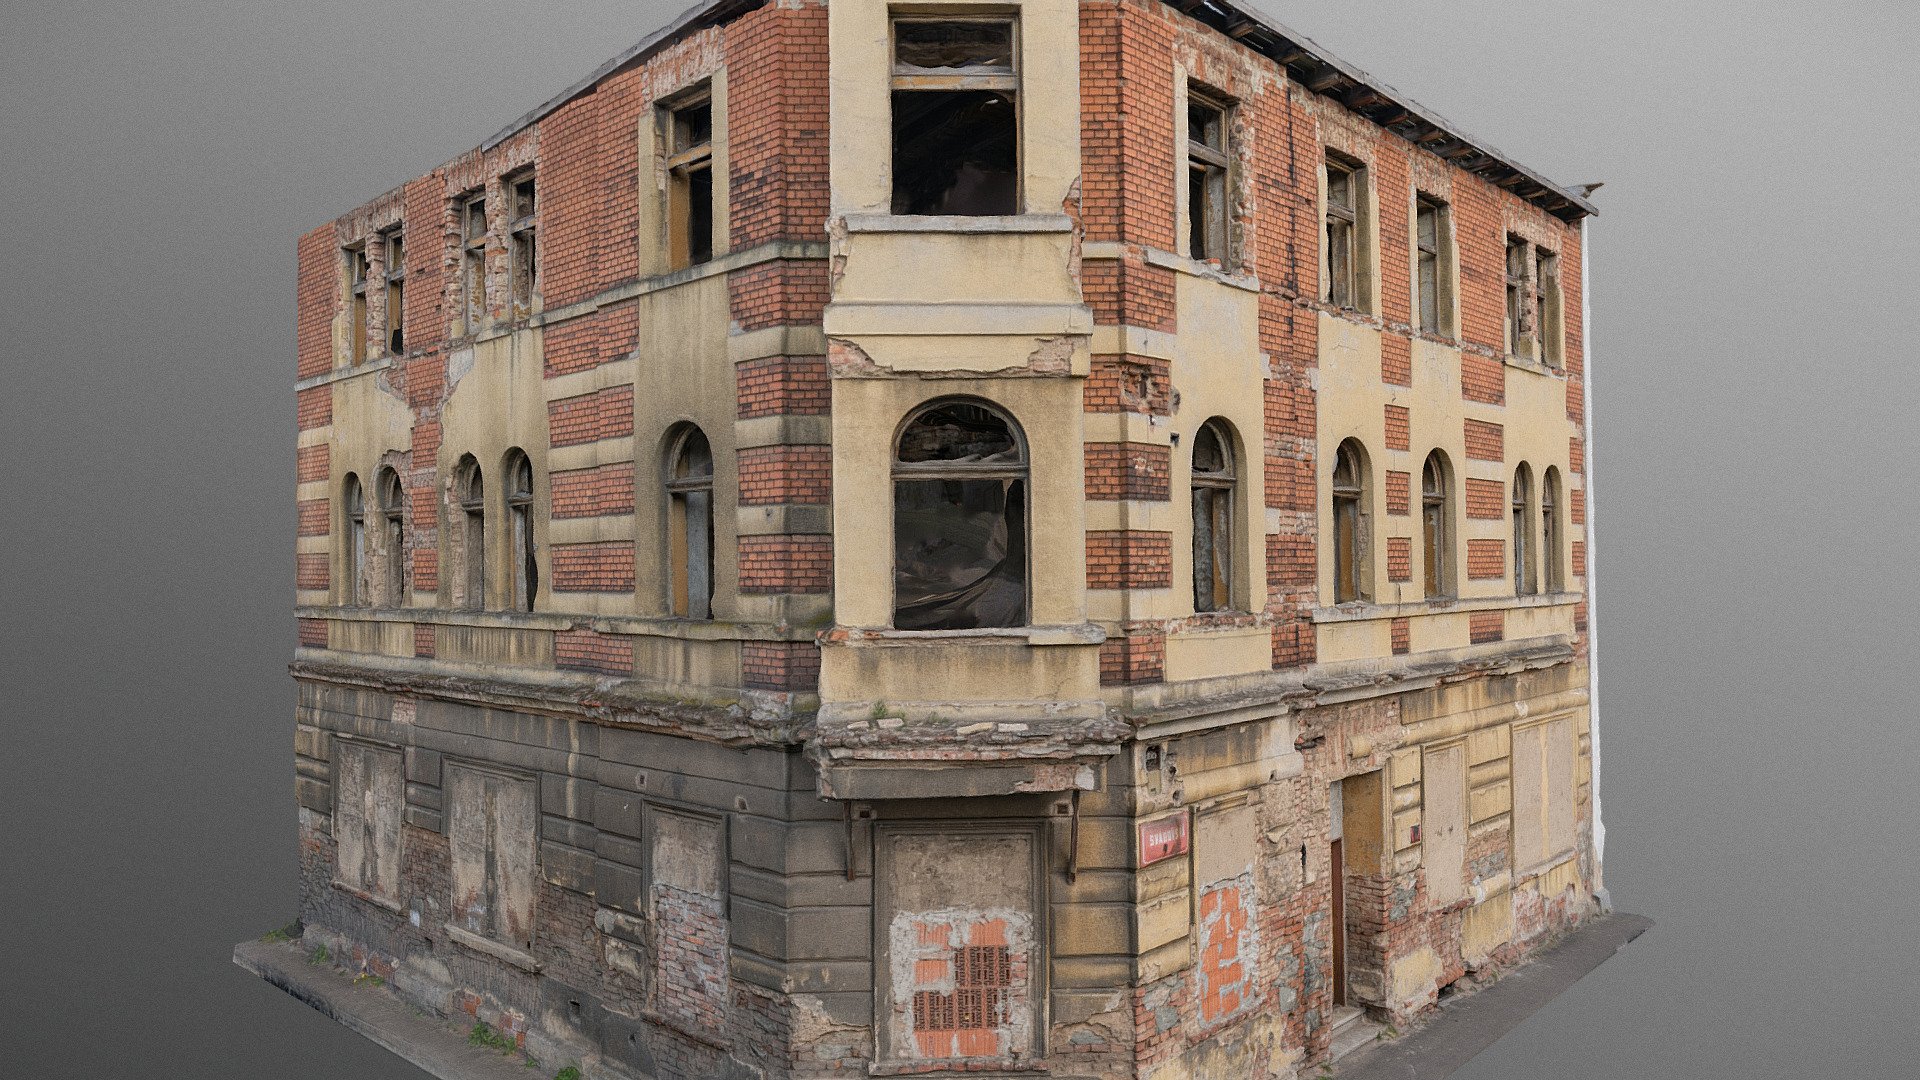 Historic old Early 20th century moorsih style decorated brick ruined derelict abandoned apartment house building facade scene 3D model - Pekařská 215 street

photogrammetry scan (350x36MP), 5x8K texture +HD normals (as additional .zip) - contact me for source photos or re-exports

impossible to get proper shot from back sadly, left side darker becasue of the dirt from nearby main road - Decorated moorish house ruin - Buy Royalty Free 3D model by matousekfoto 3d model